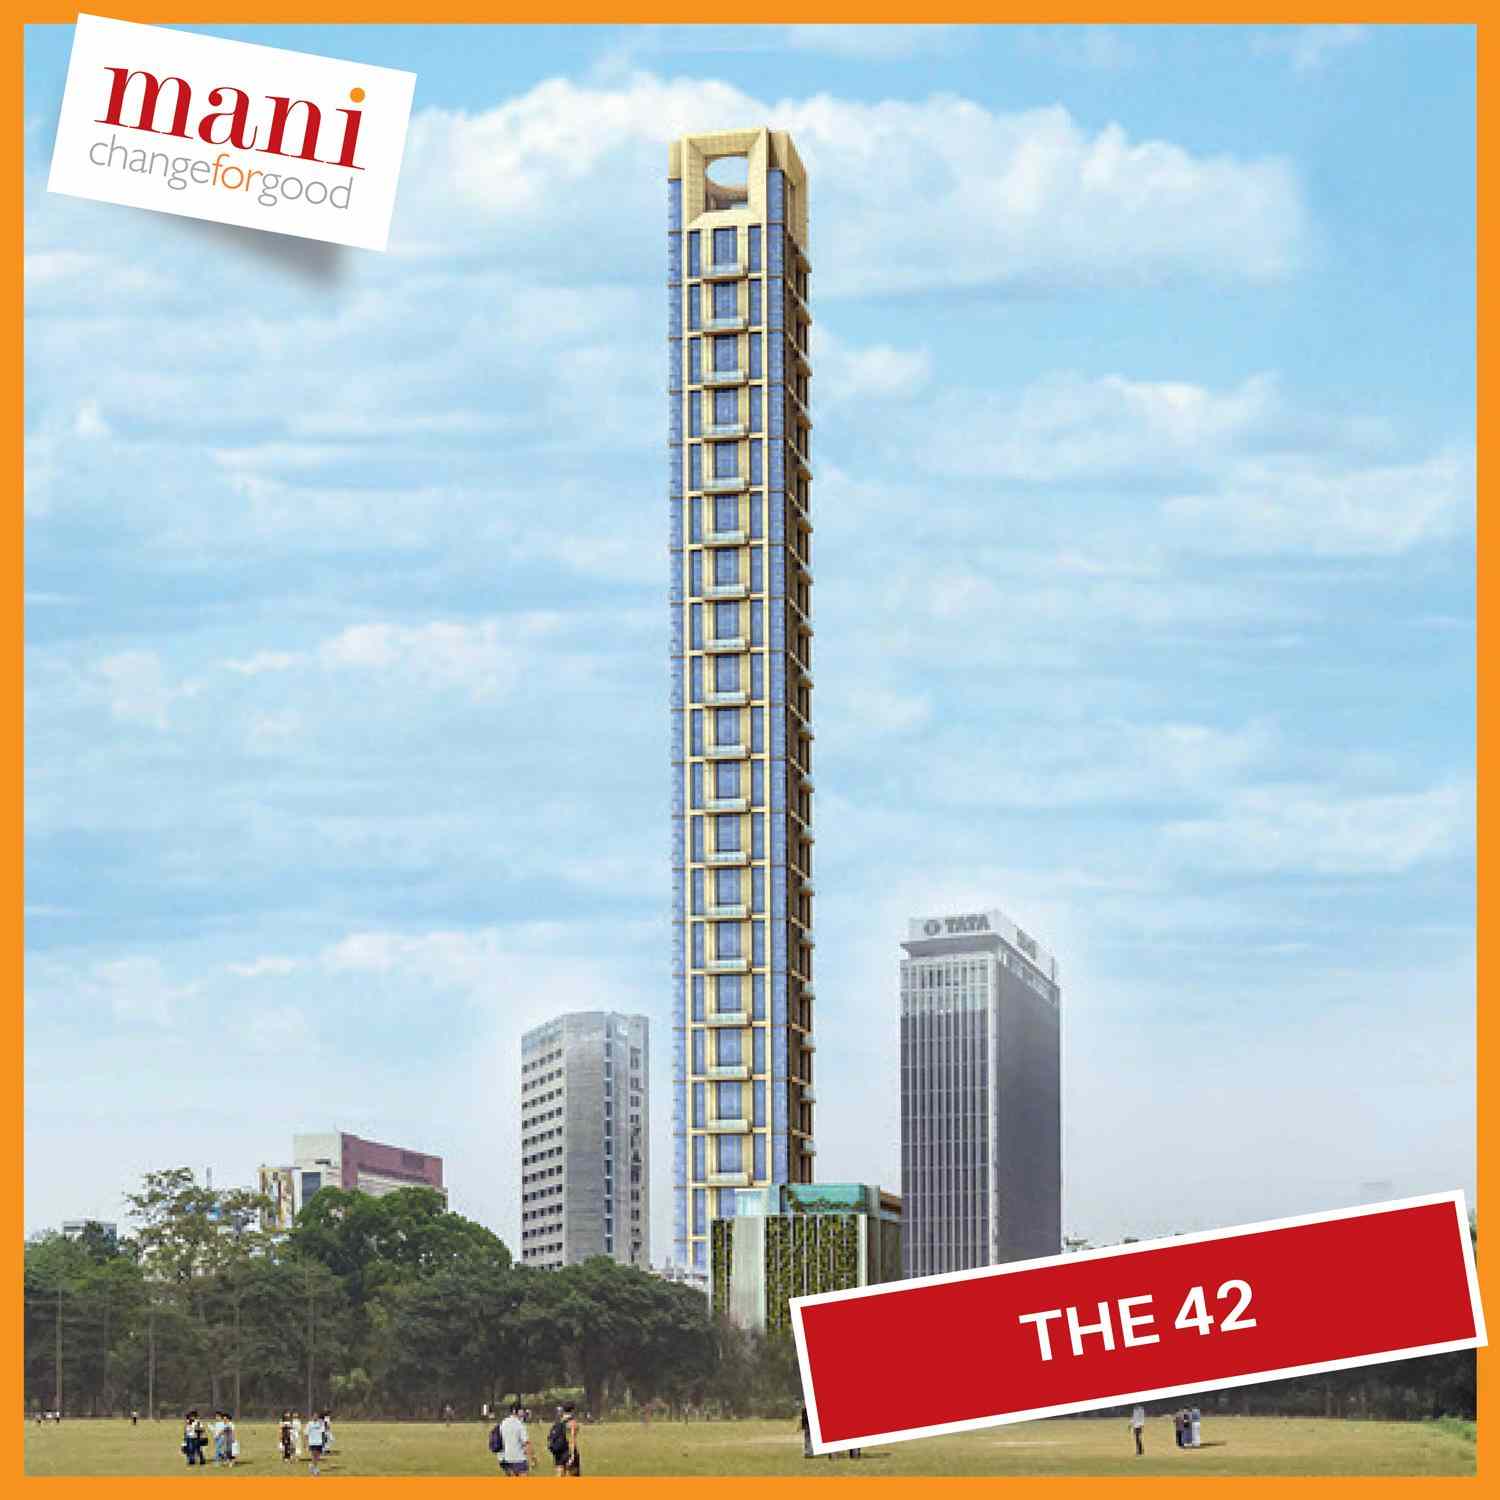 Make your everyday graceful by residing at Mani The 42 in Kolkata